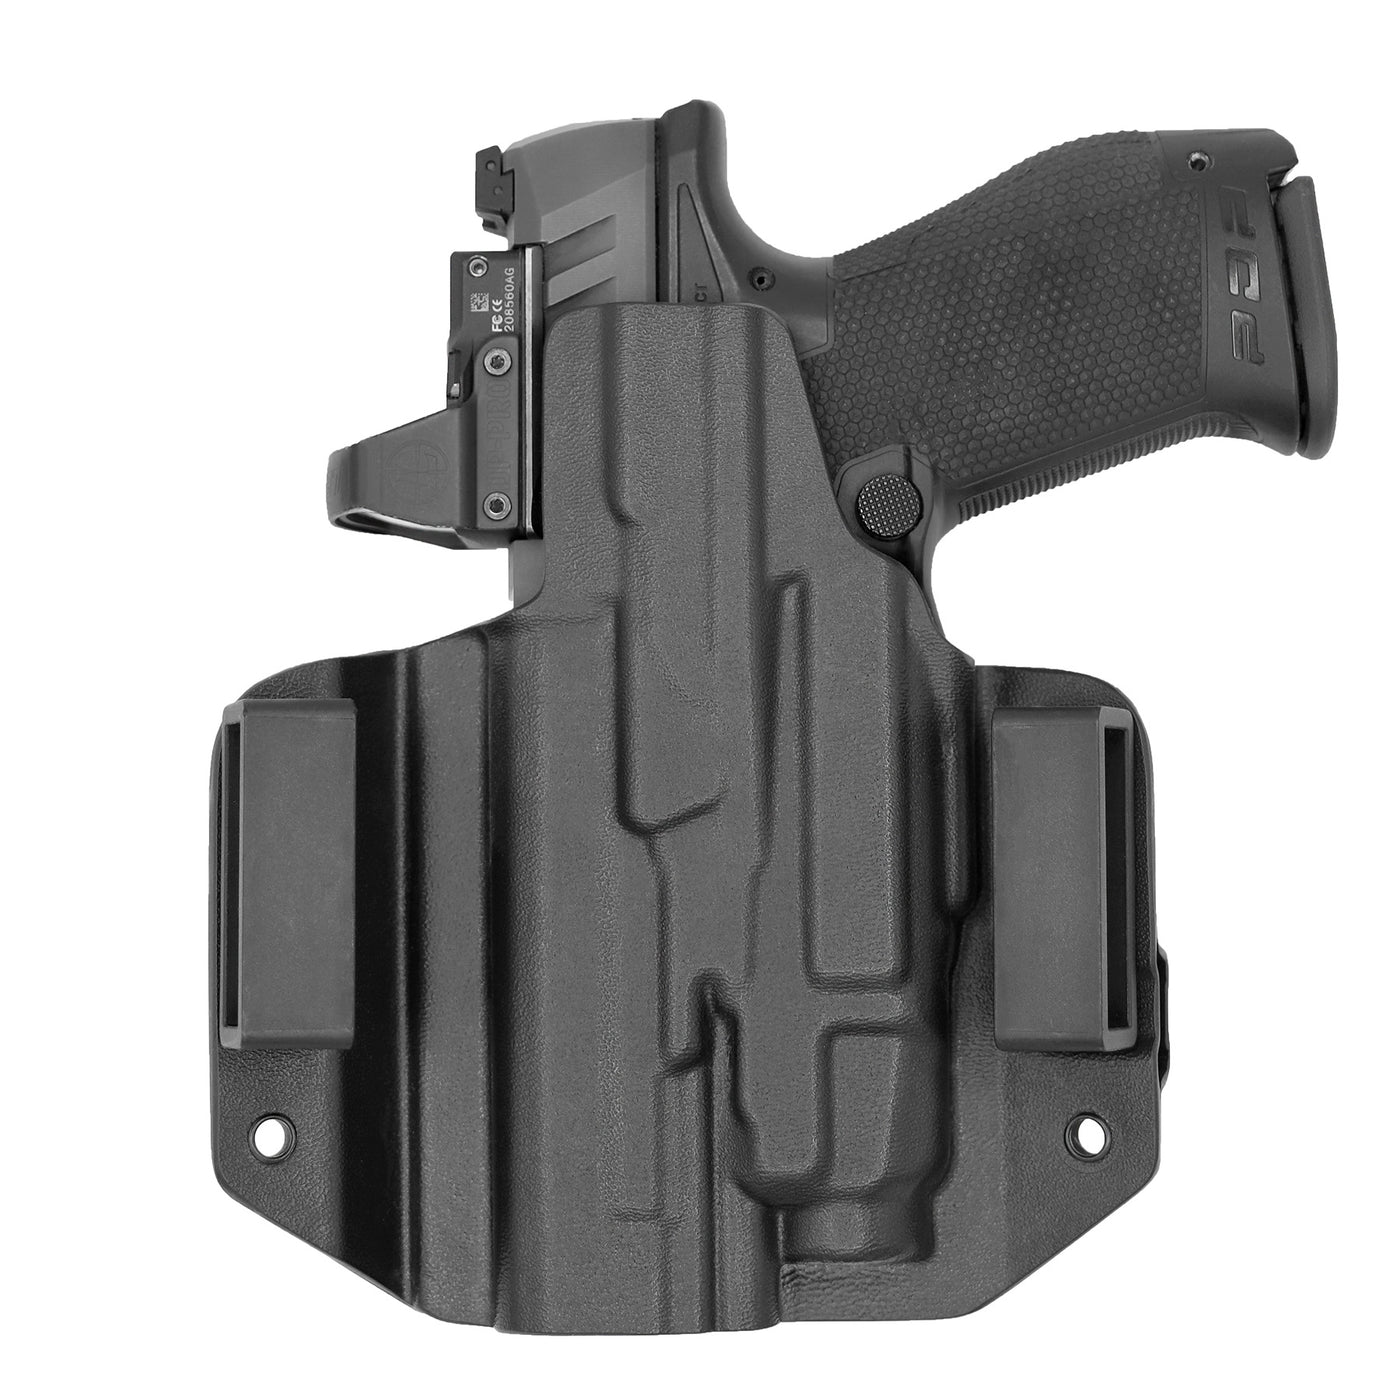 C&G Holsters custom OWB Tactical M&P 9/40 Streamlight TLR7/A In holstered position back view